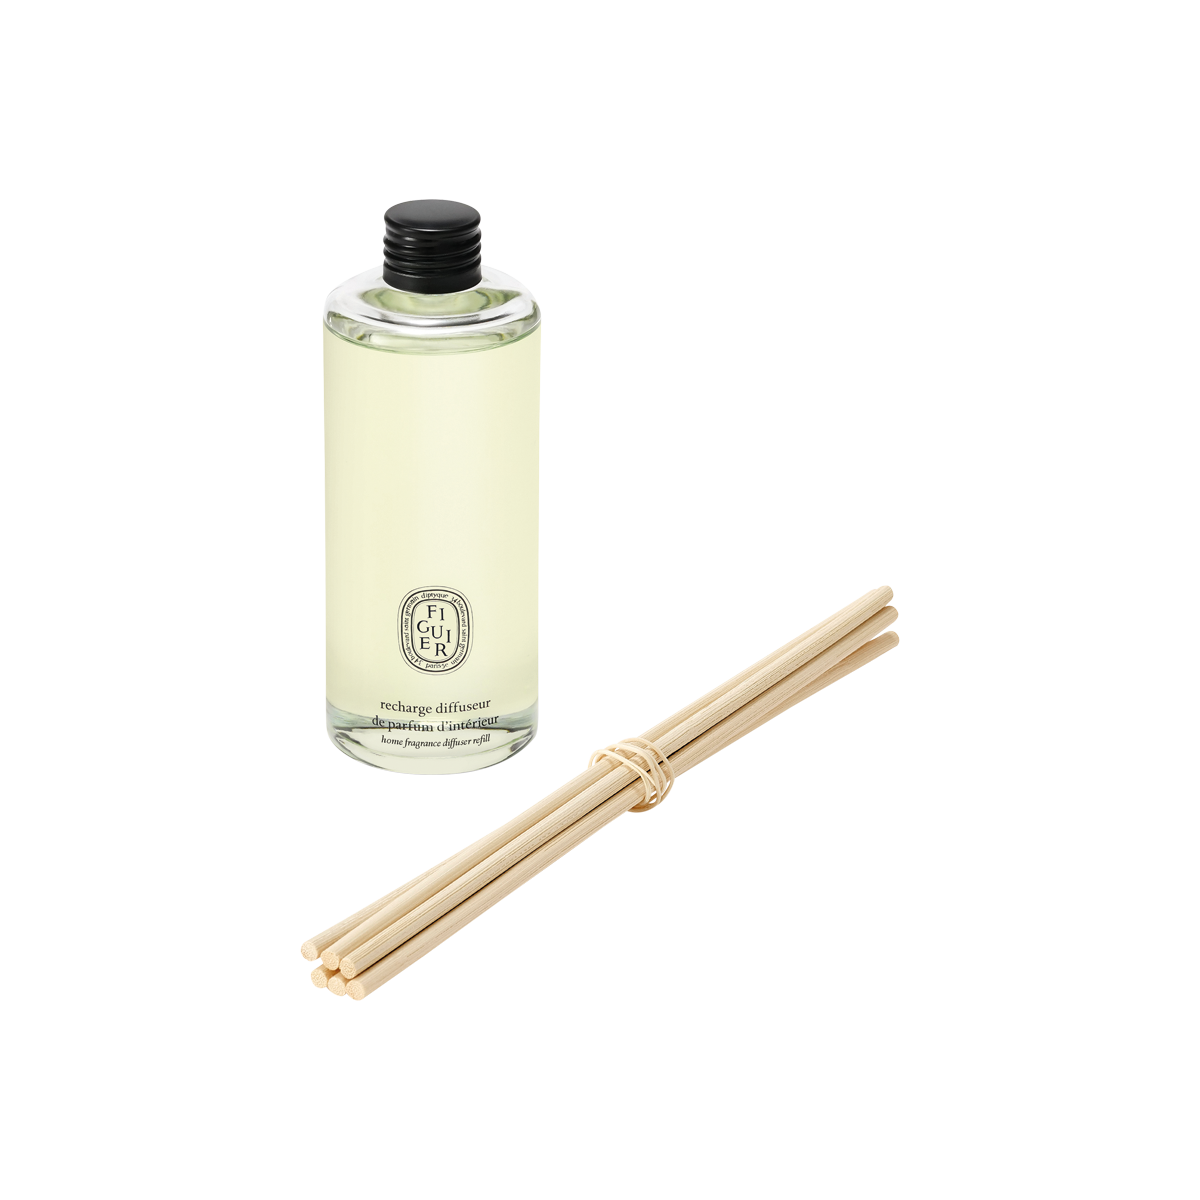 Diptyque - Reed Diffuser Figuier Refill